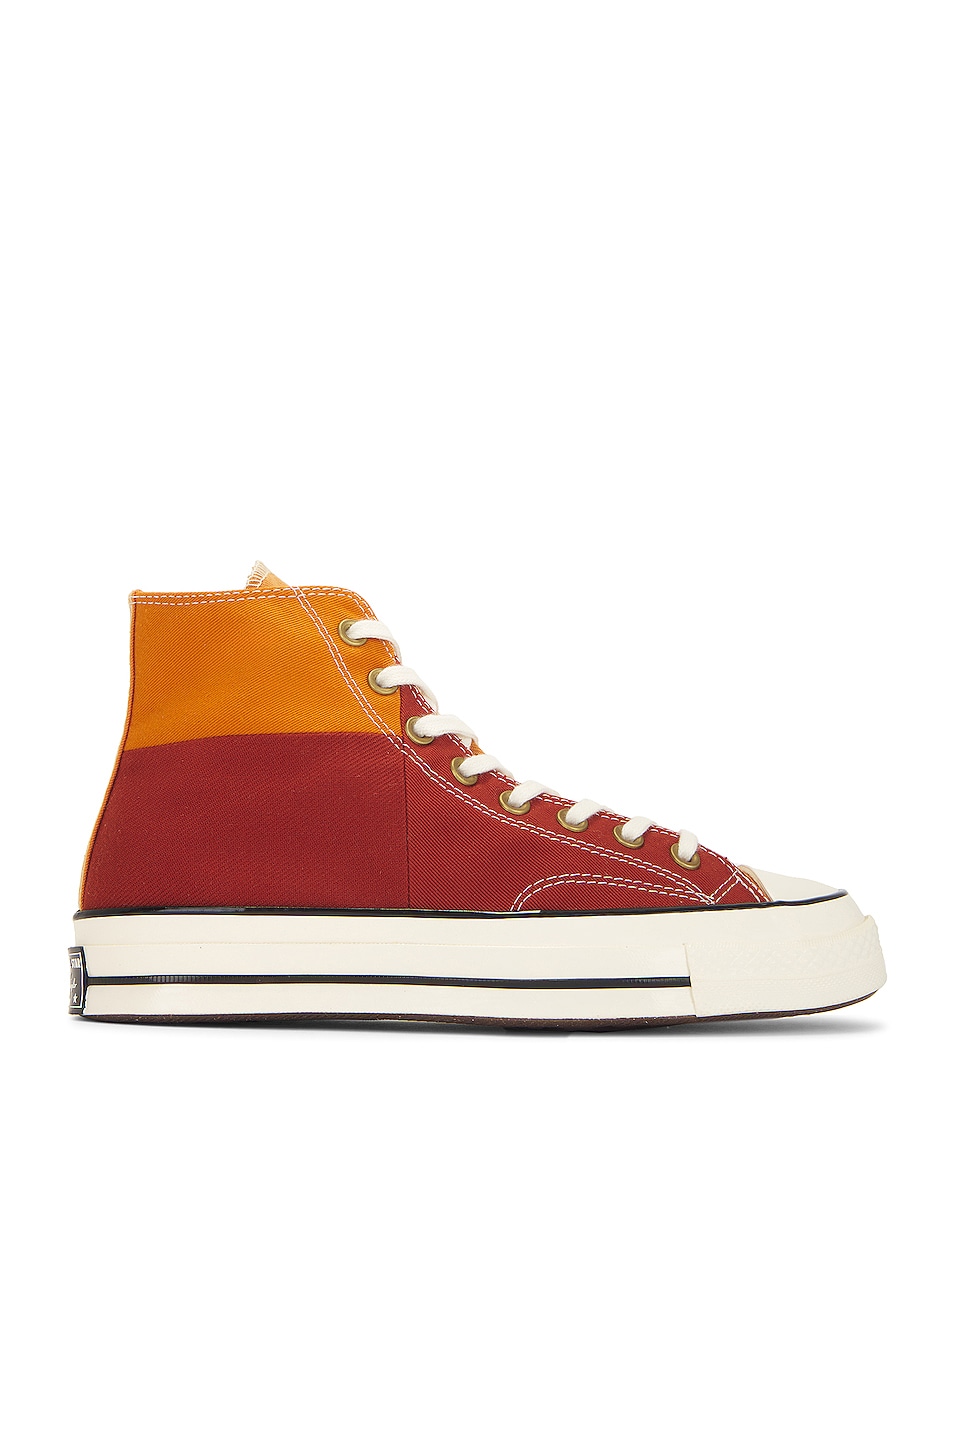 Image 1 of Converse Chuck 70 Colorblocked in Monarch, Rugged Orange, & Egret